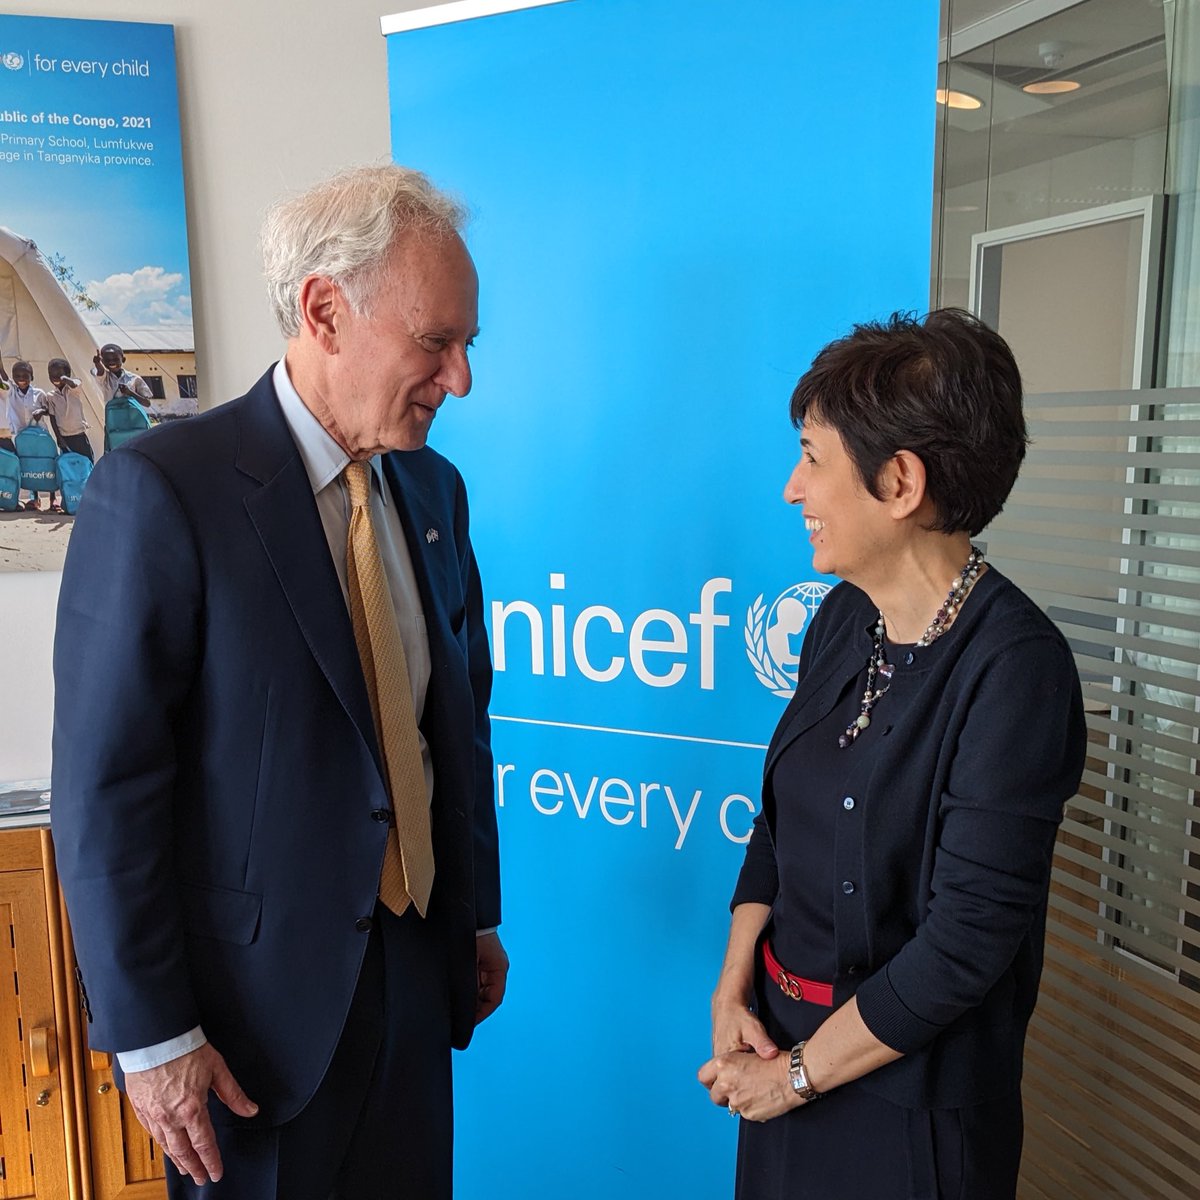 Wonderful meeting with Director @LeilaPakkala of @UNICEFSupply Division to talk about the #UNICEF efforts to reach children around the world with essential supplies. The United States is proud to be UNICEF’s top funding partner and helping the most vulnerable children around the